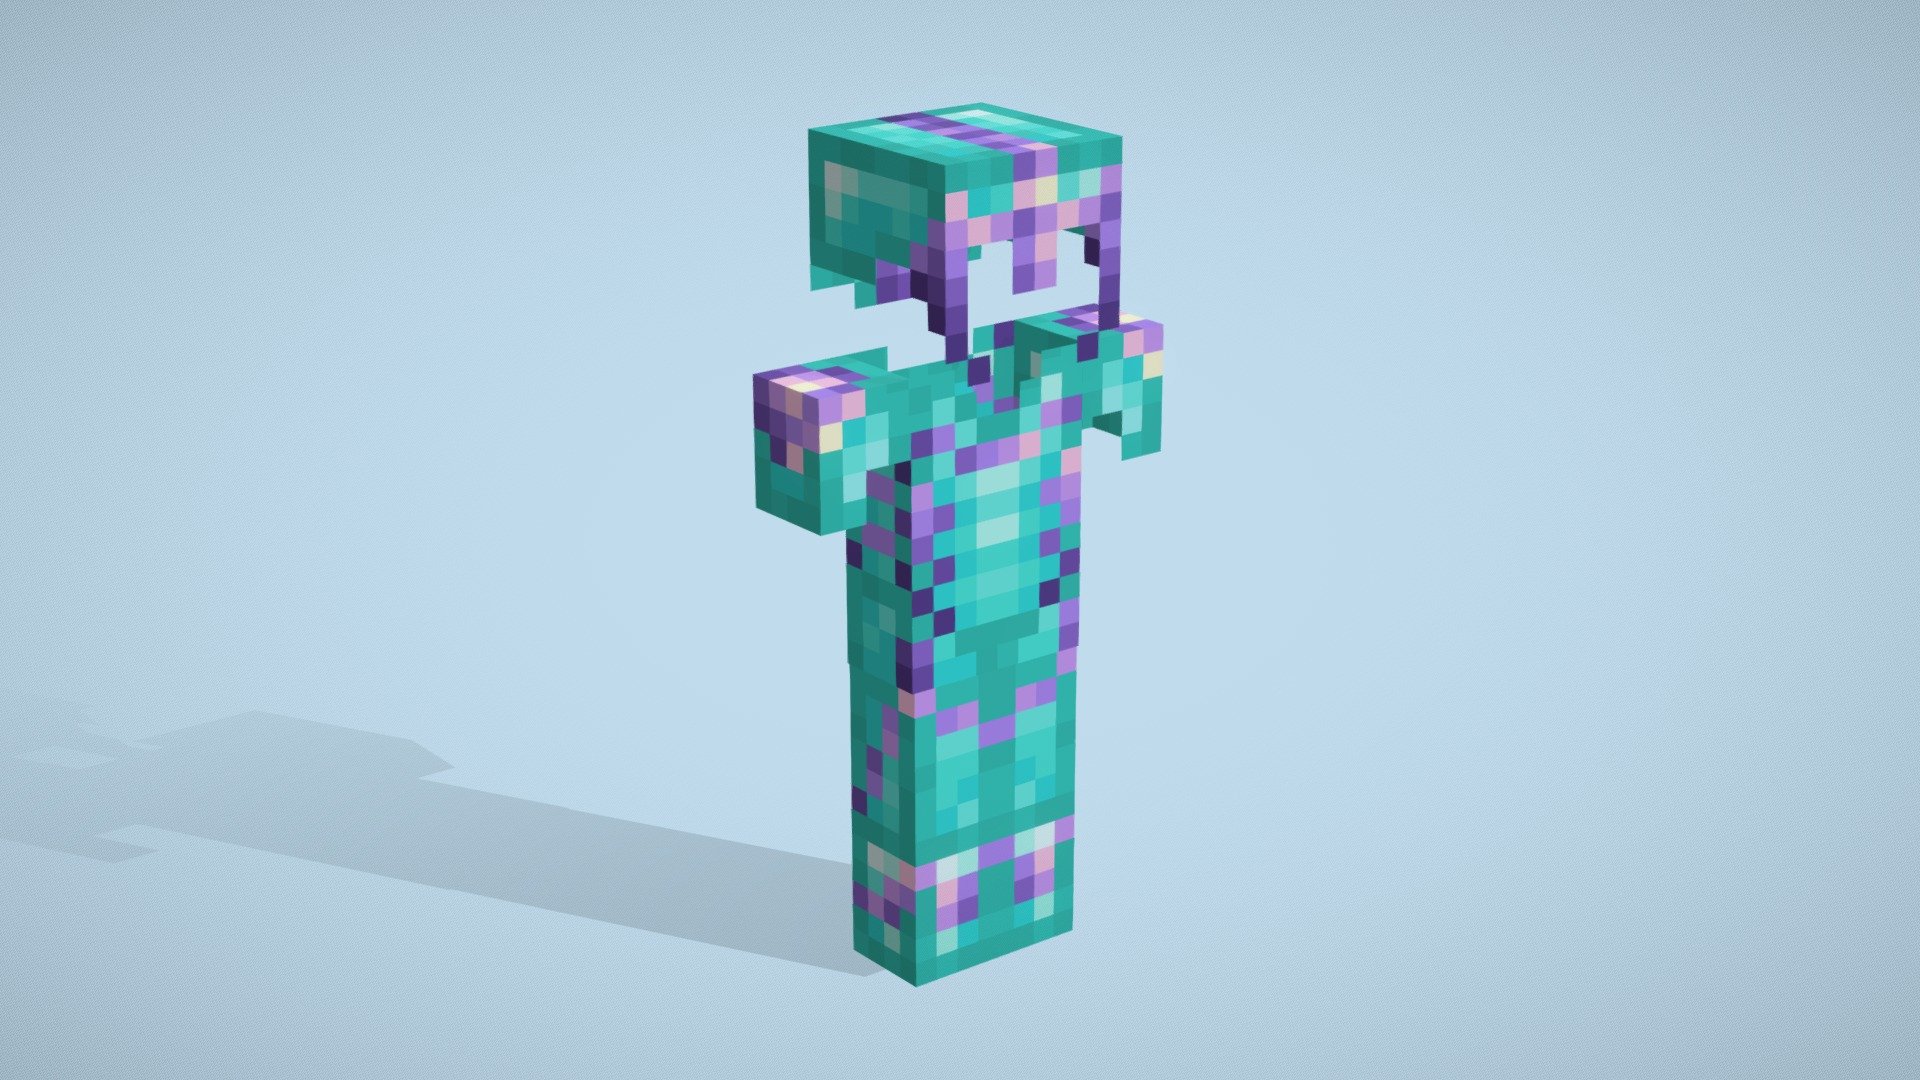 An armor that is part of an Add on available on Minecraft Bedrock, this, extends and improves existing mechanics with amethyst, adding magical properties, rings, decoration, armor, tools. Etc, balanced.

Available on MCPEDL

User: @Vadcon09 - Amethyst Armor | Add-on Minecraft - 3D model by frederick09 3d model